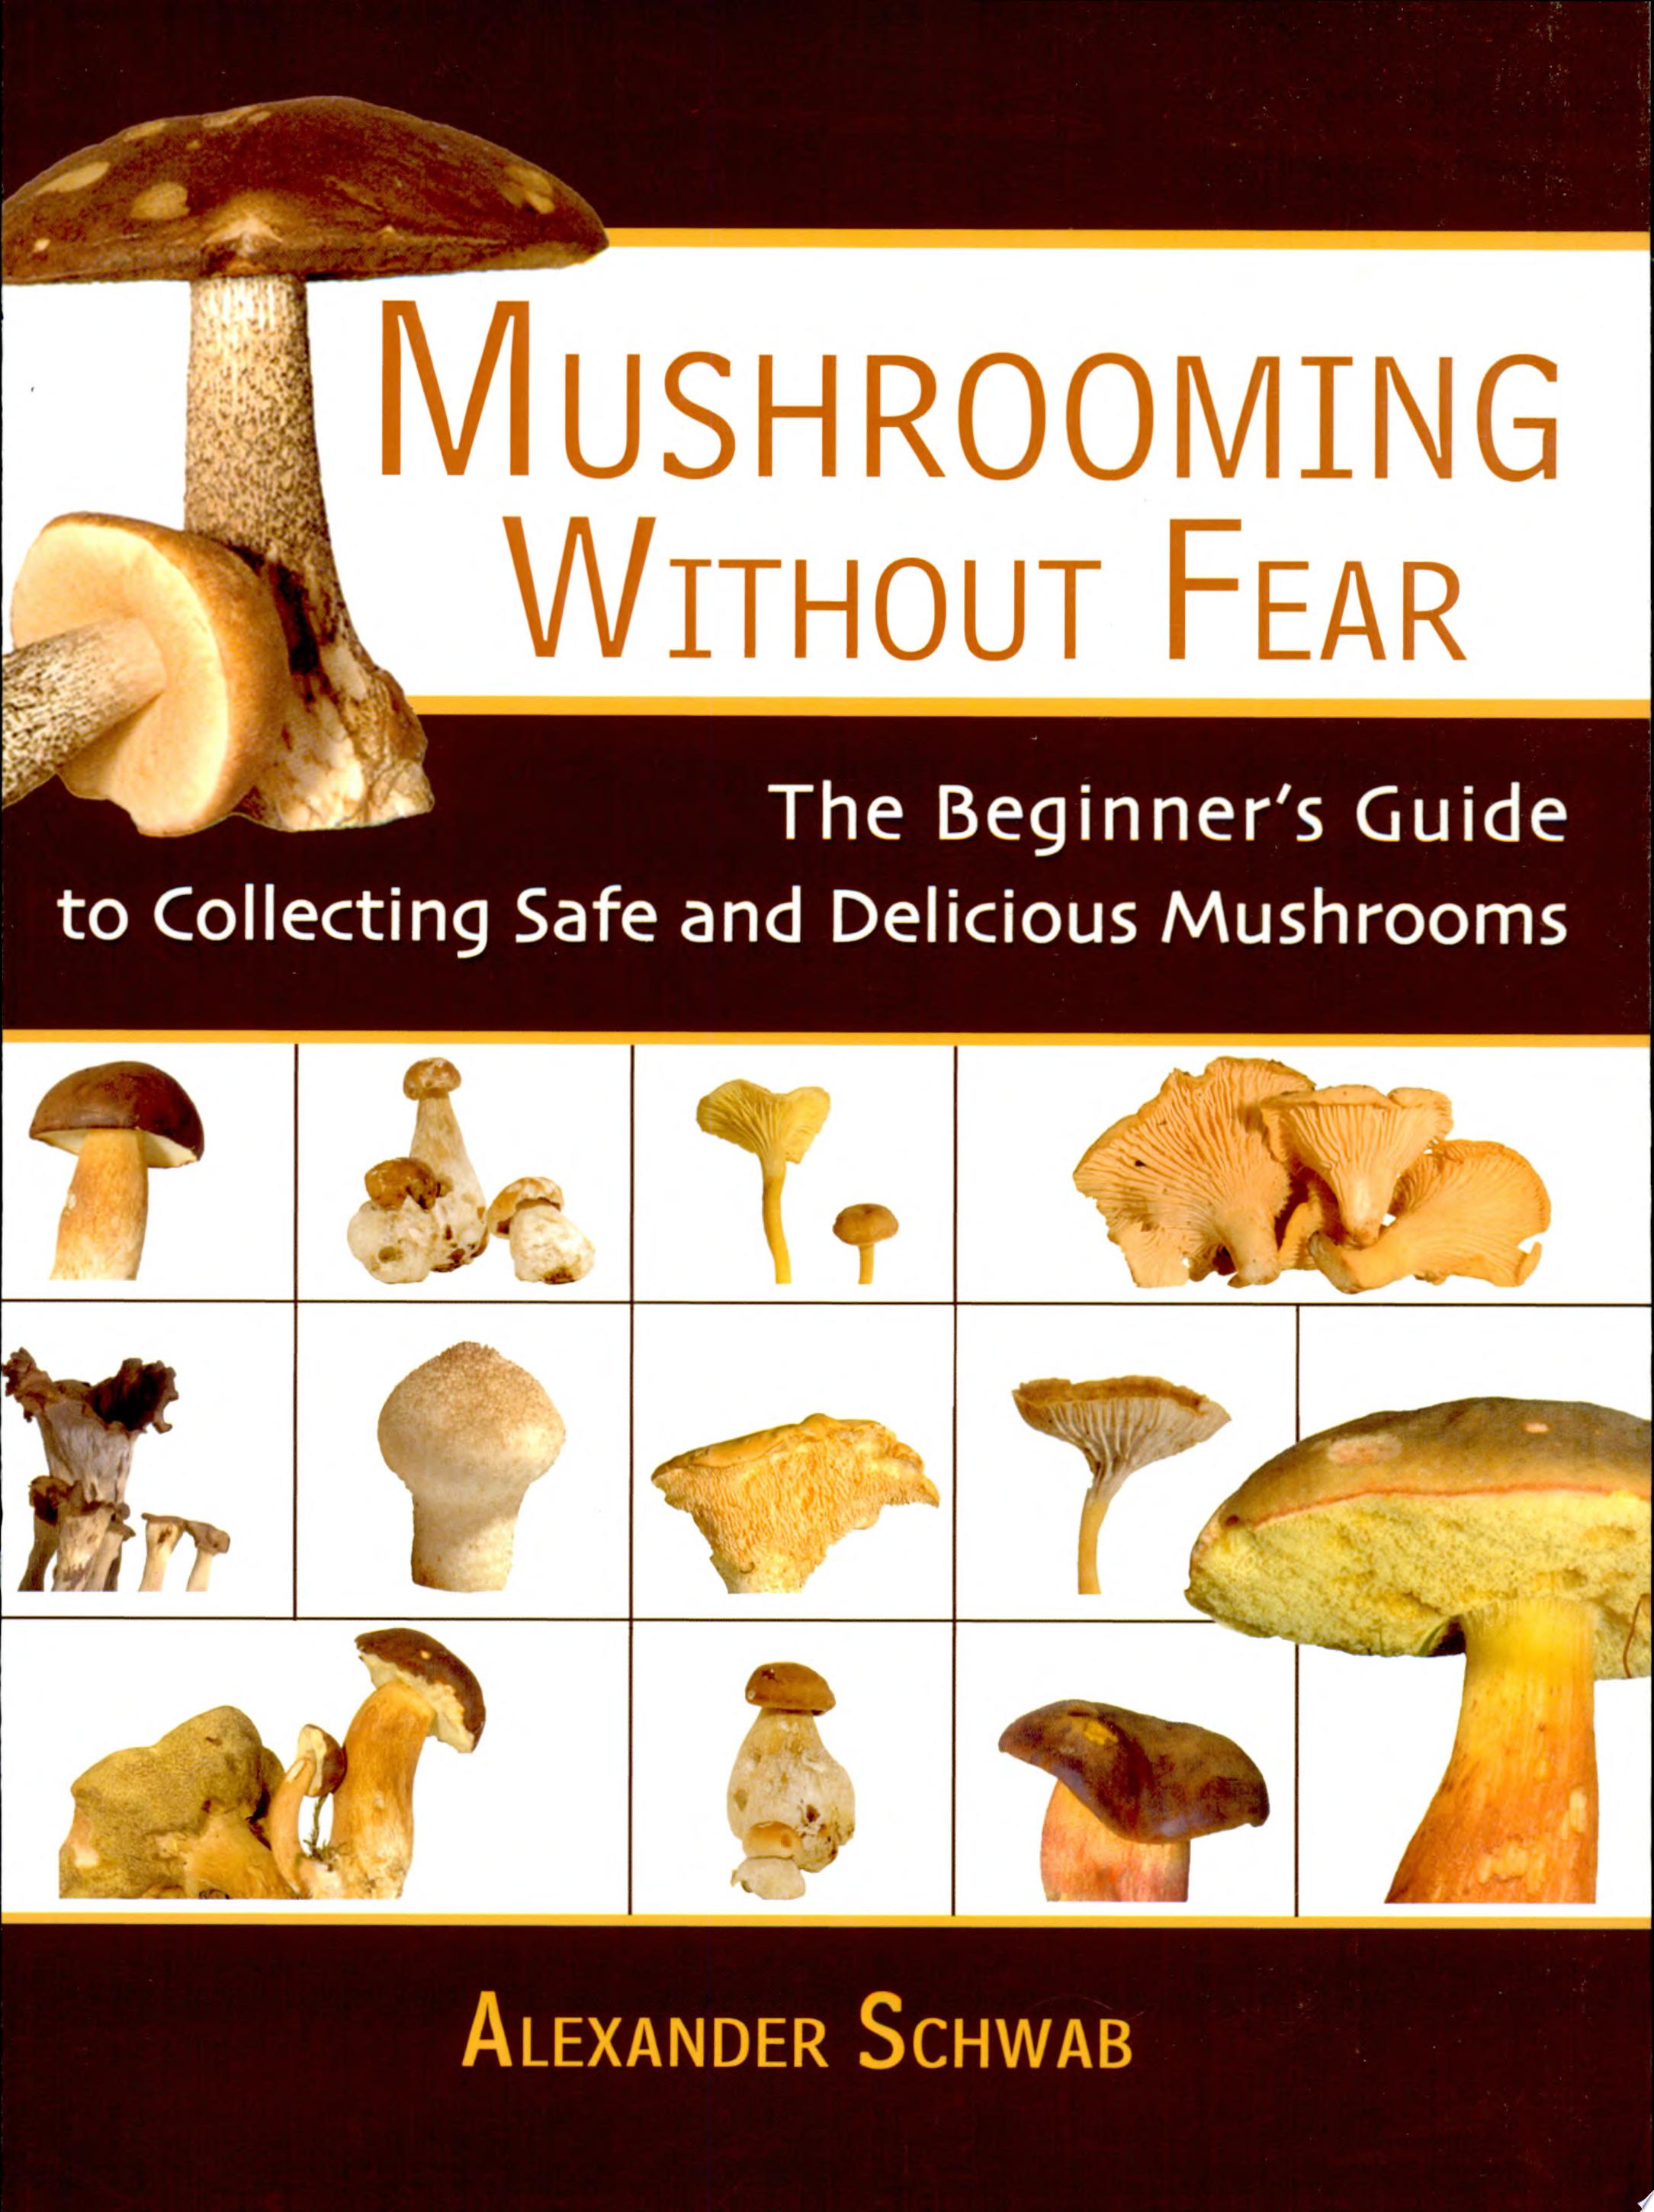 Image for "Mushrooming Without Fear"